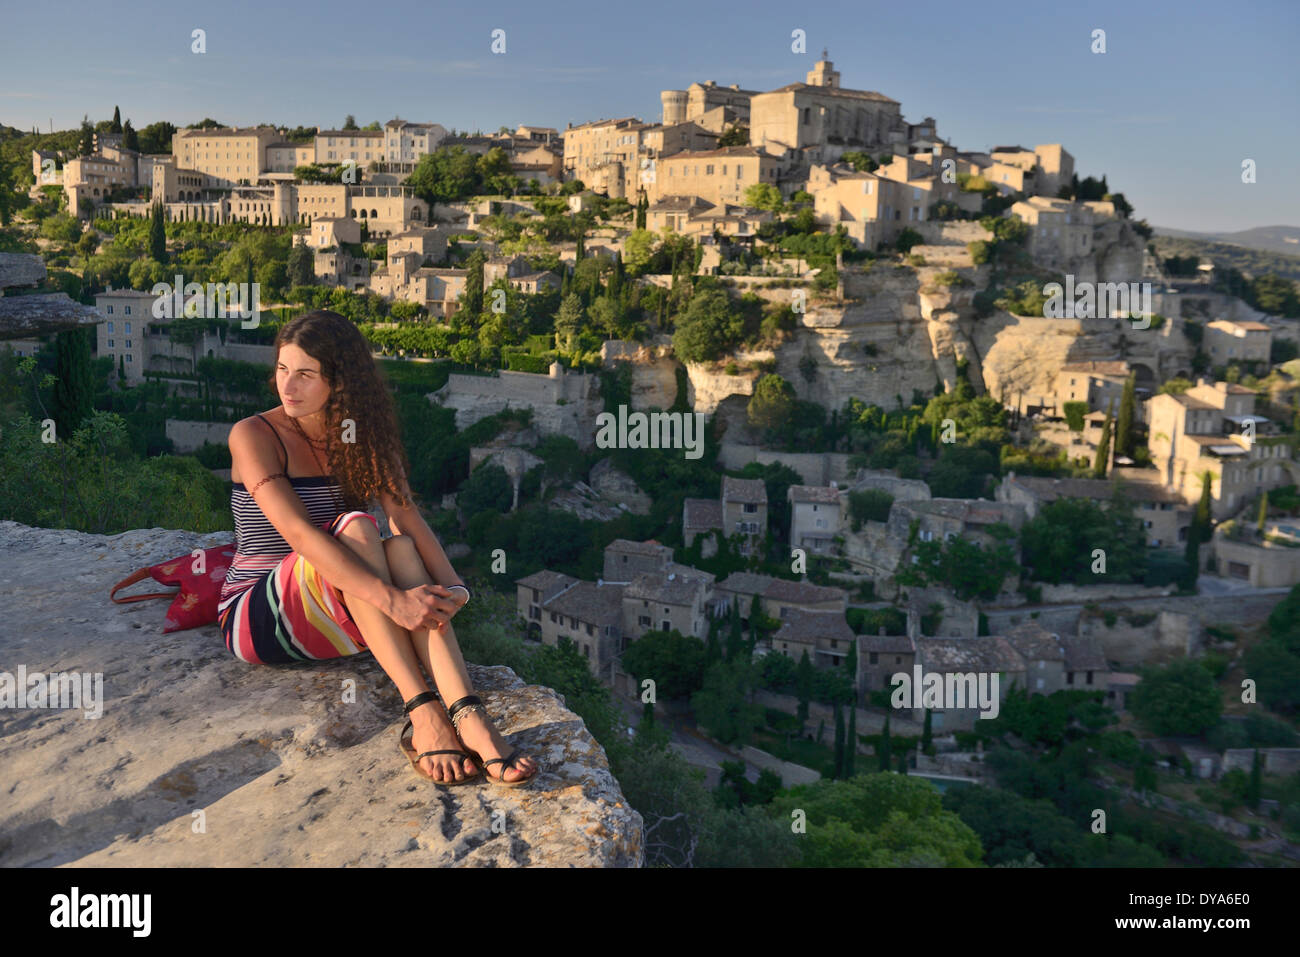 Europe, France, Provence, Vaucluse, Gordes, town, sit, cliff, girl, french, woman, young, sit relax, tourism, Stock Photo